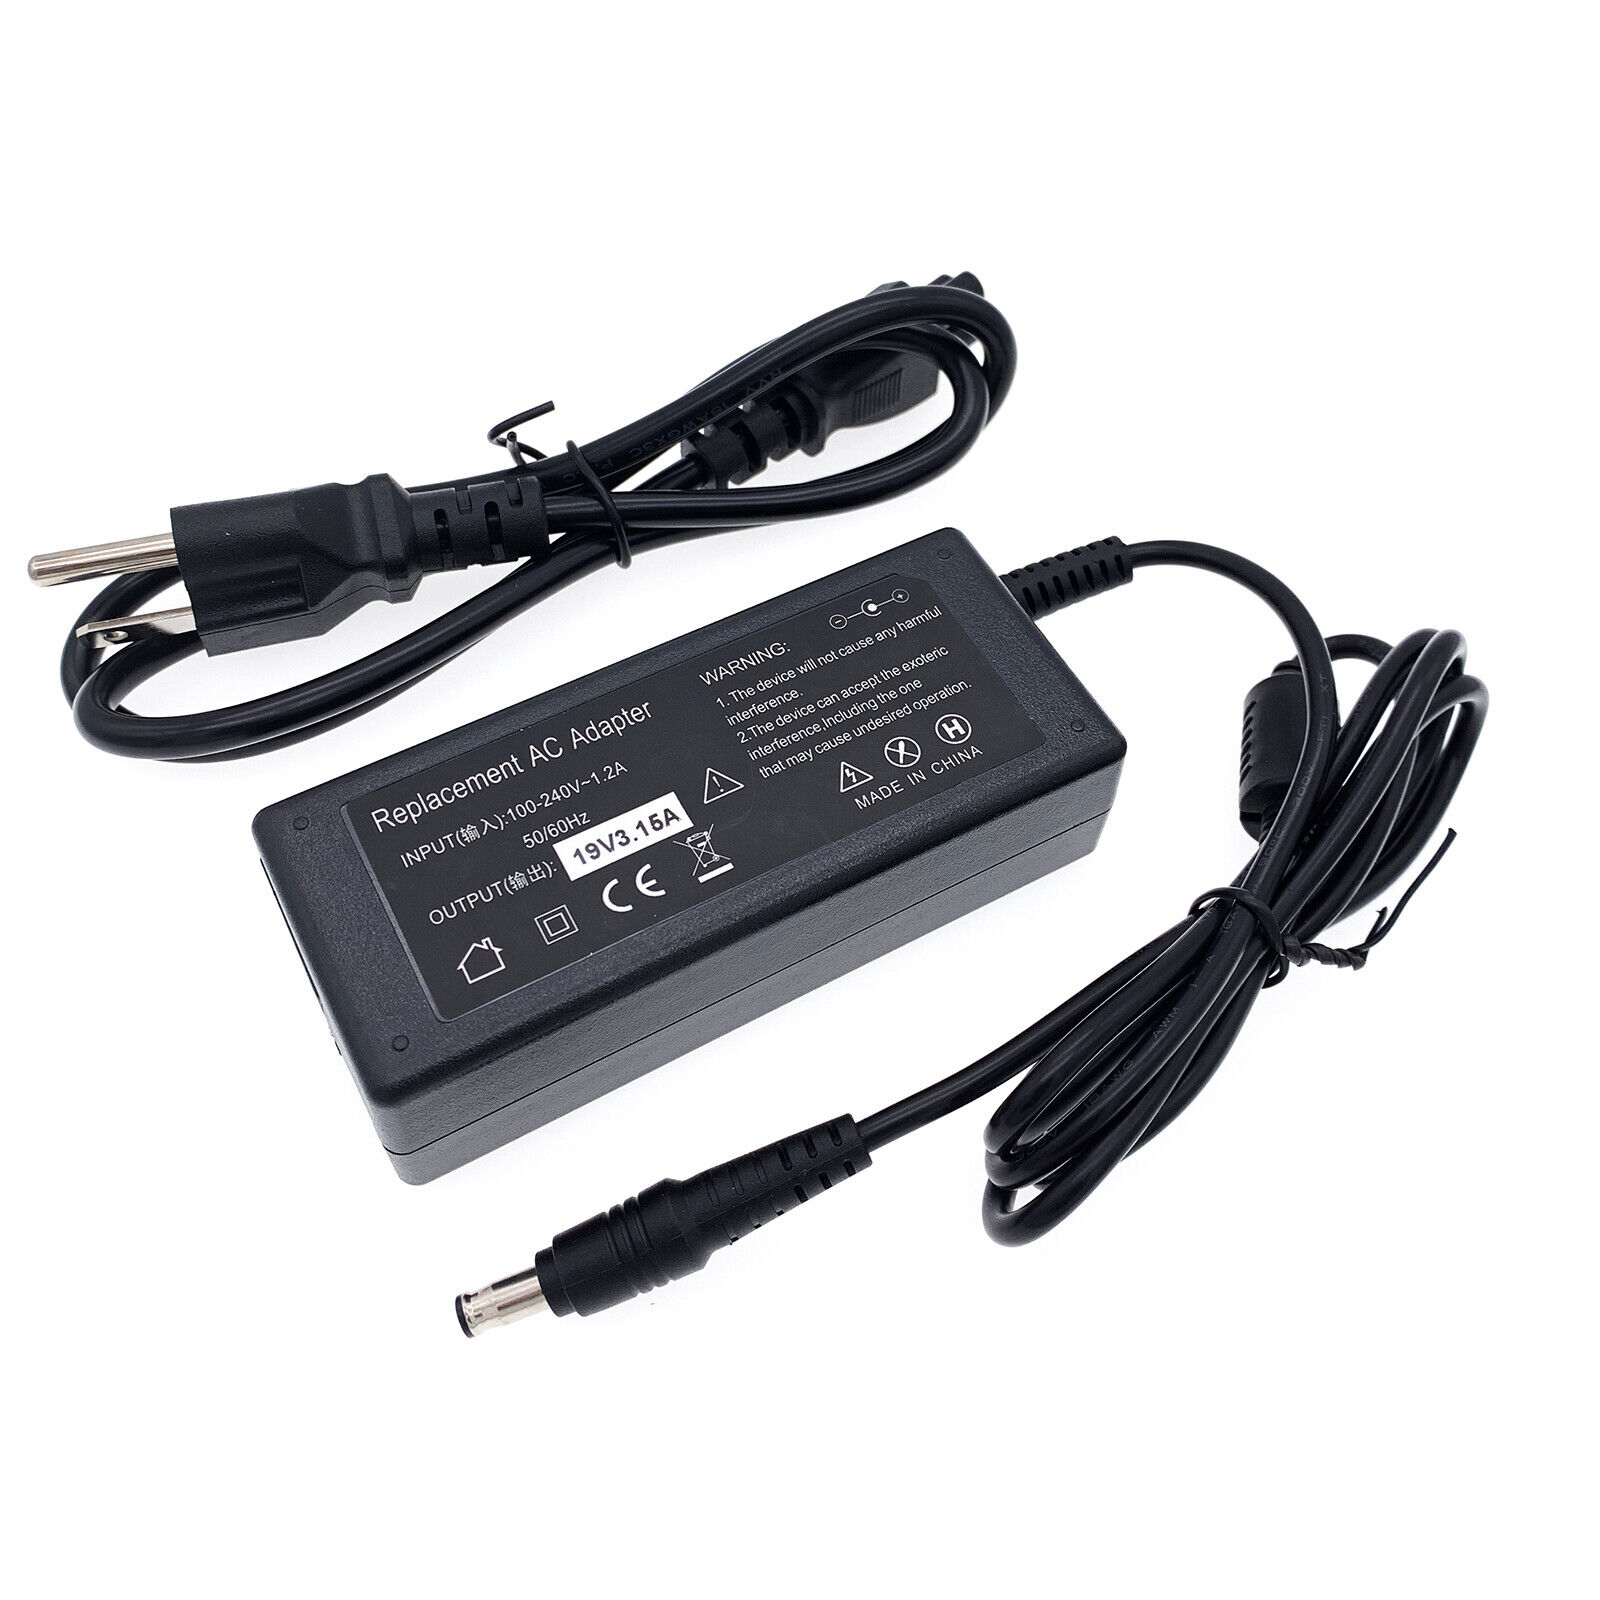 AC Power Adapter Charger for Gateway SOLO 200 200ARC 200E 200X AD-6019 Notebook